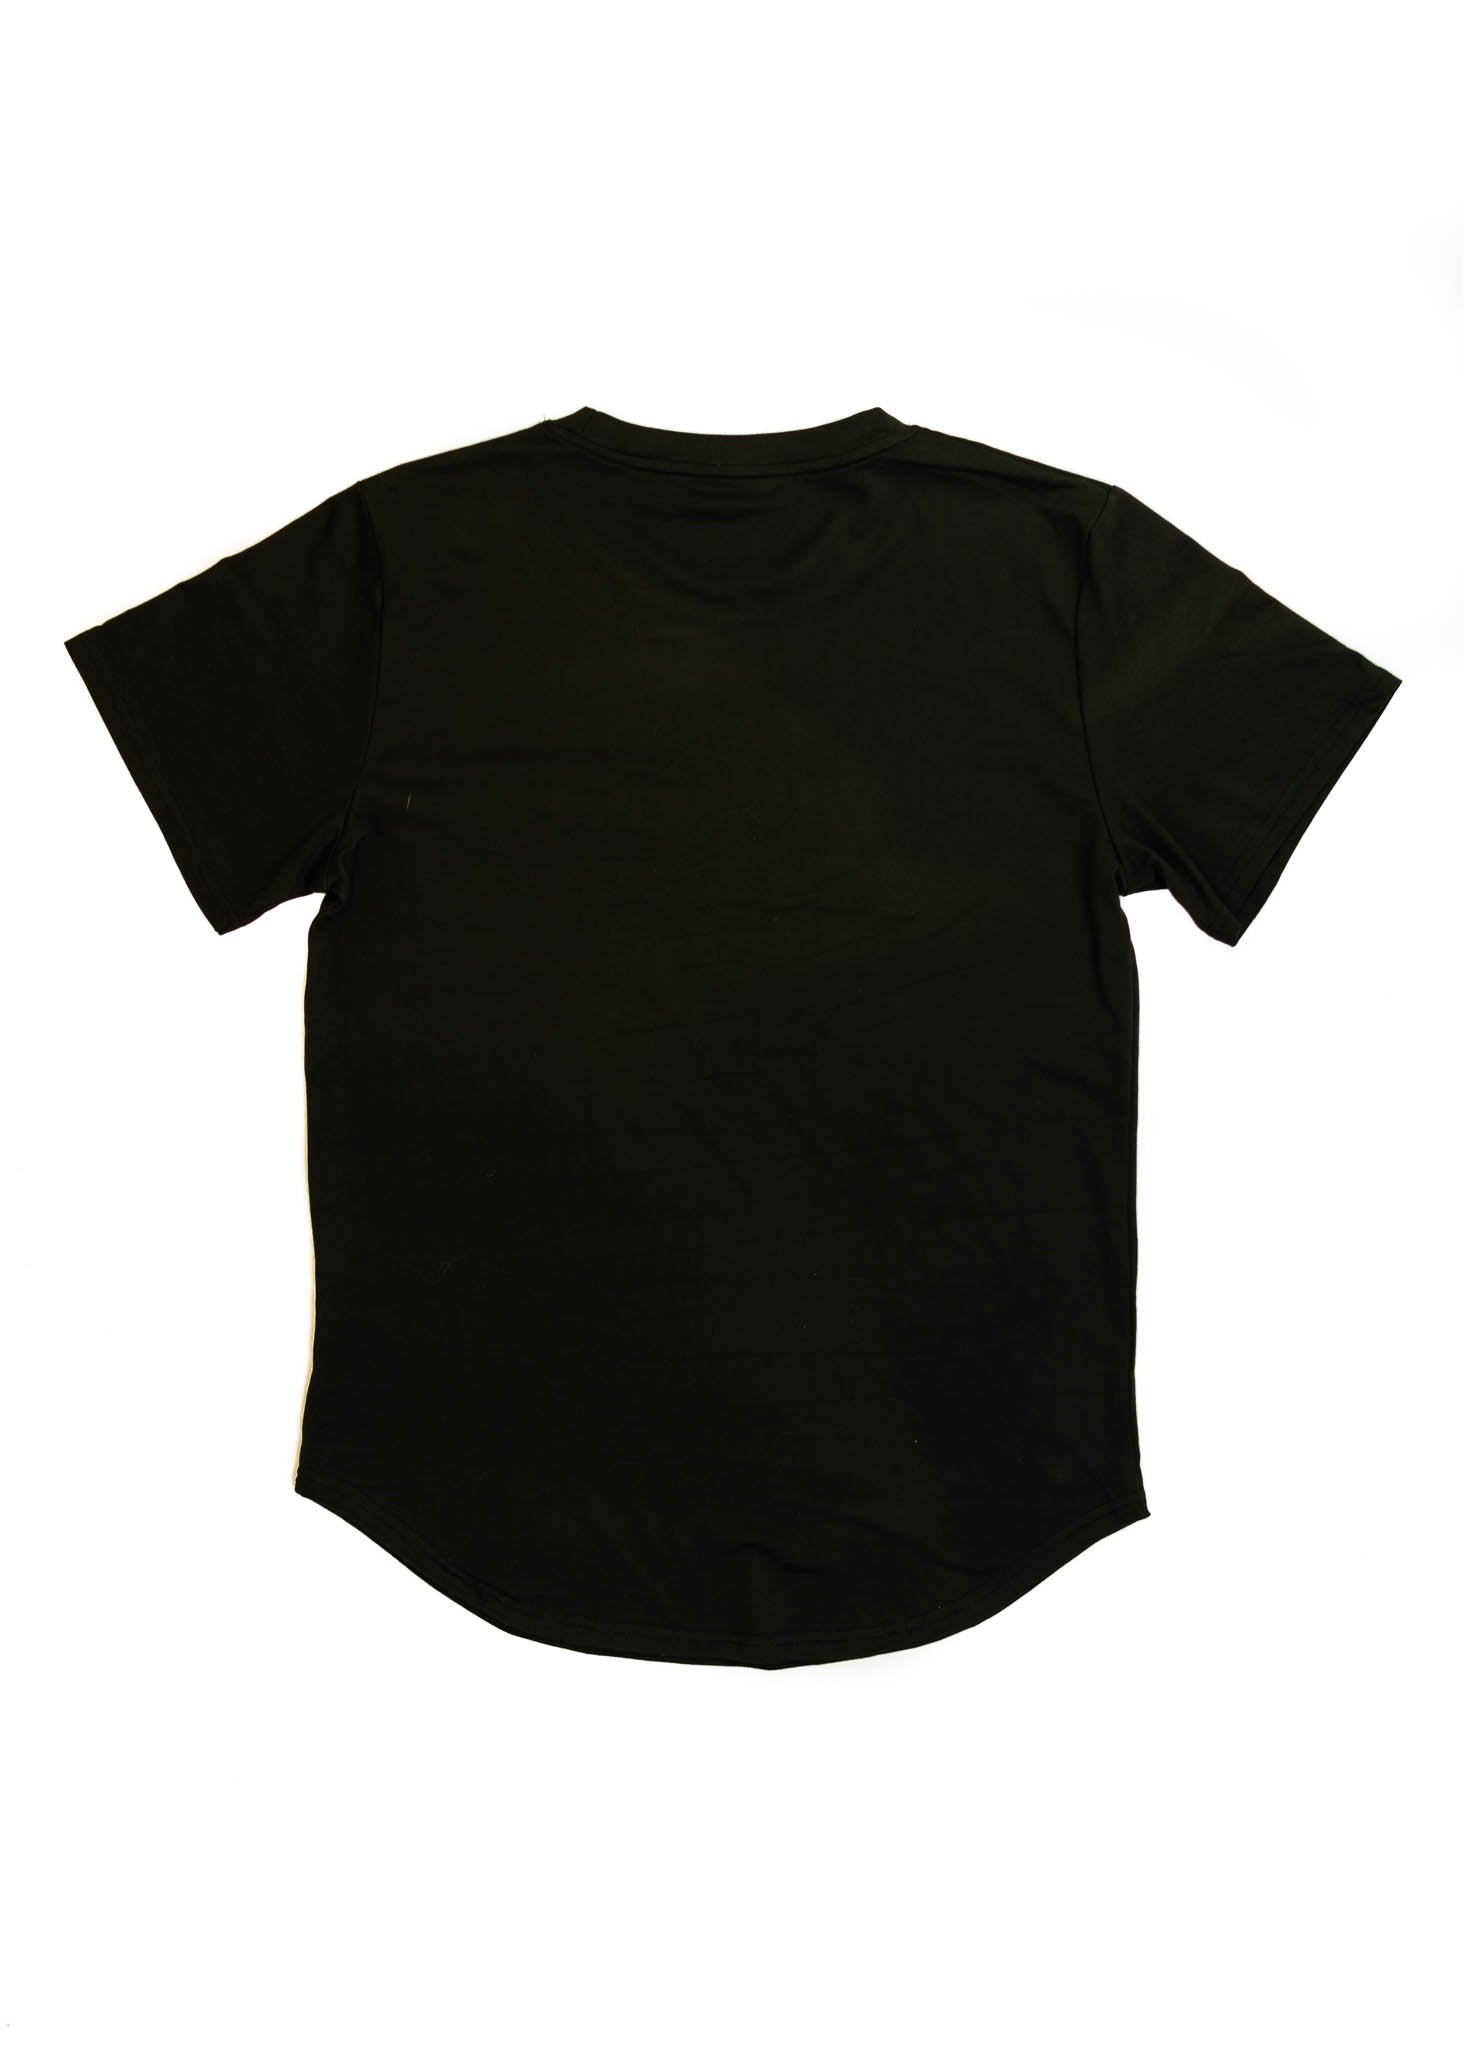 A black Volvo t-shirt for men. Photo is the back view of the shirt with an embroidered red 850R. Fabric composition is a polyester, and cotton mix. The material is very soft, stretchy, non-transparent. The style of this shirt is short sleeve, with a crewneck neckline.